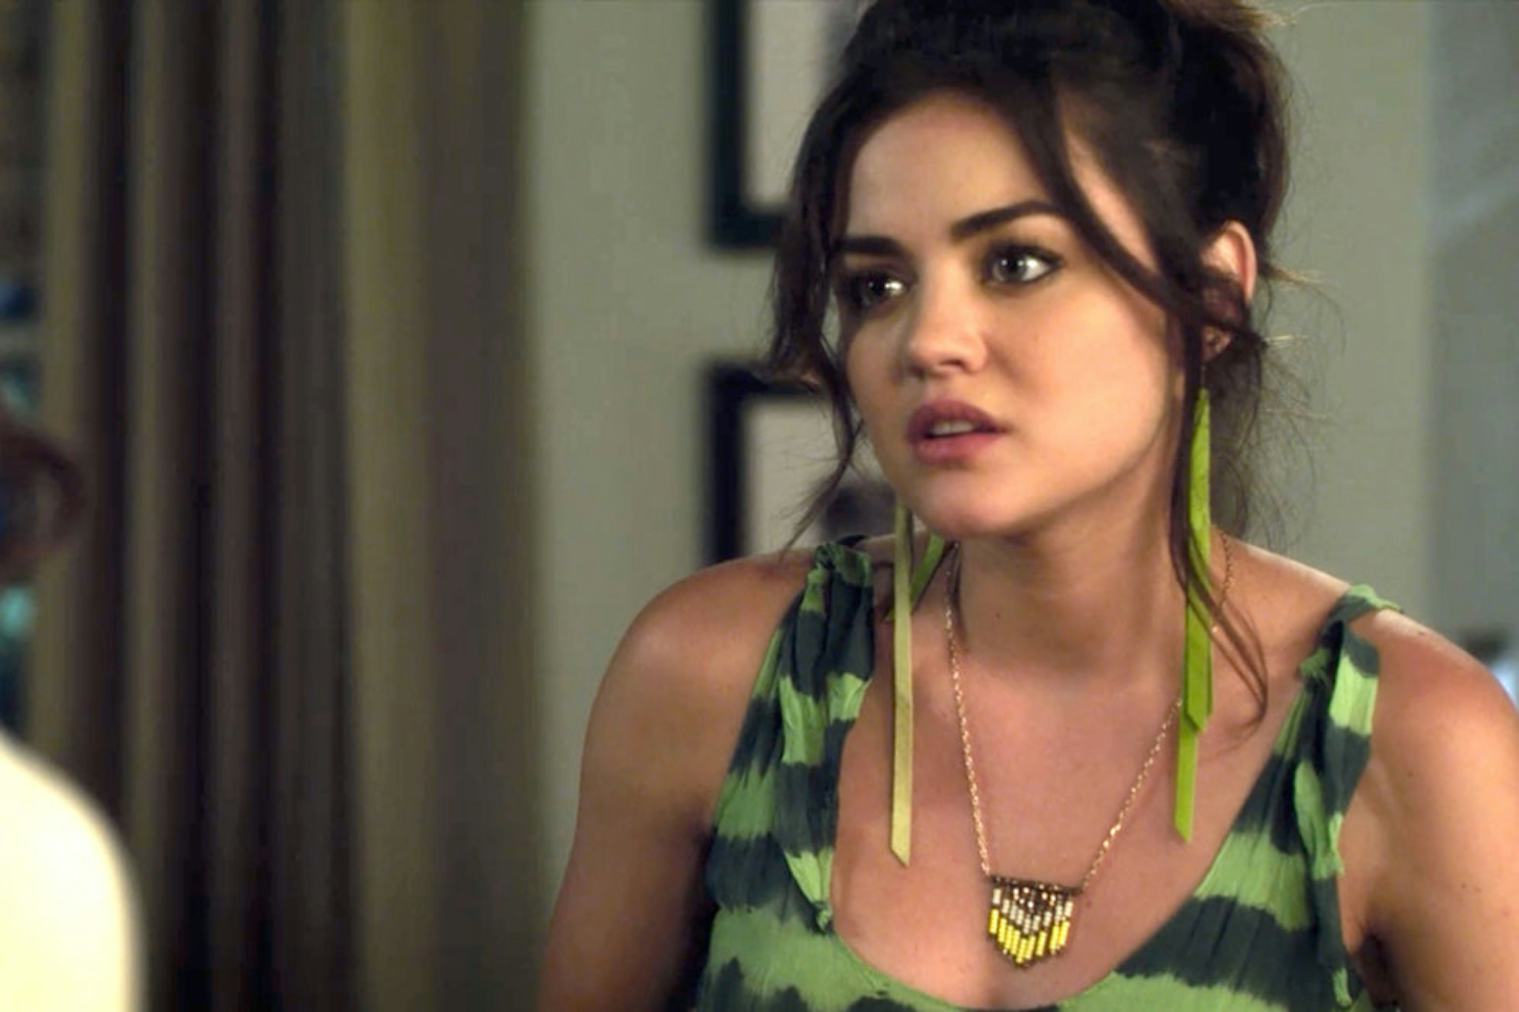 Ranking Arias Earrings On Pretty Little Liars From Totally Bonkers To Very Chic — Photos